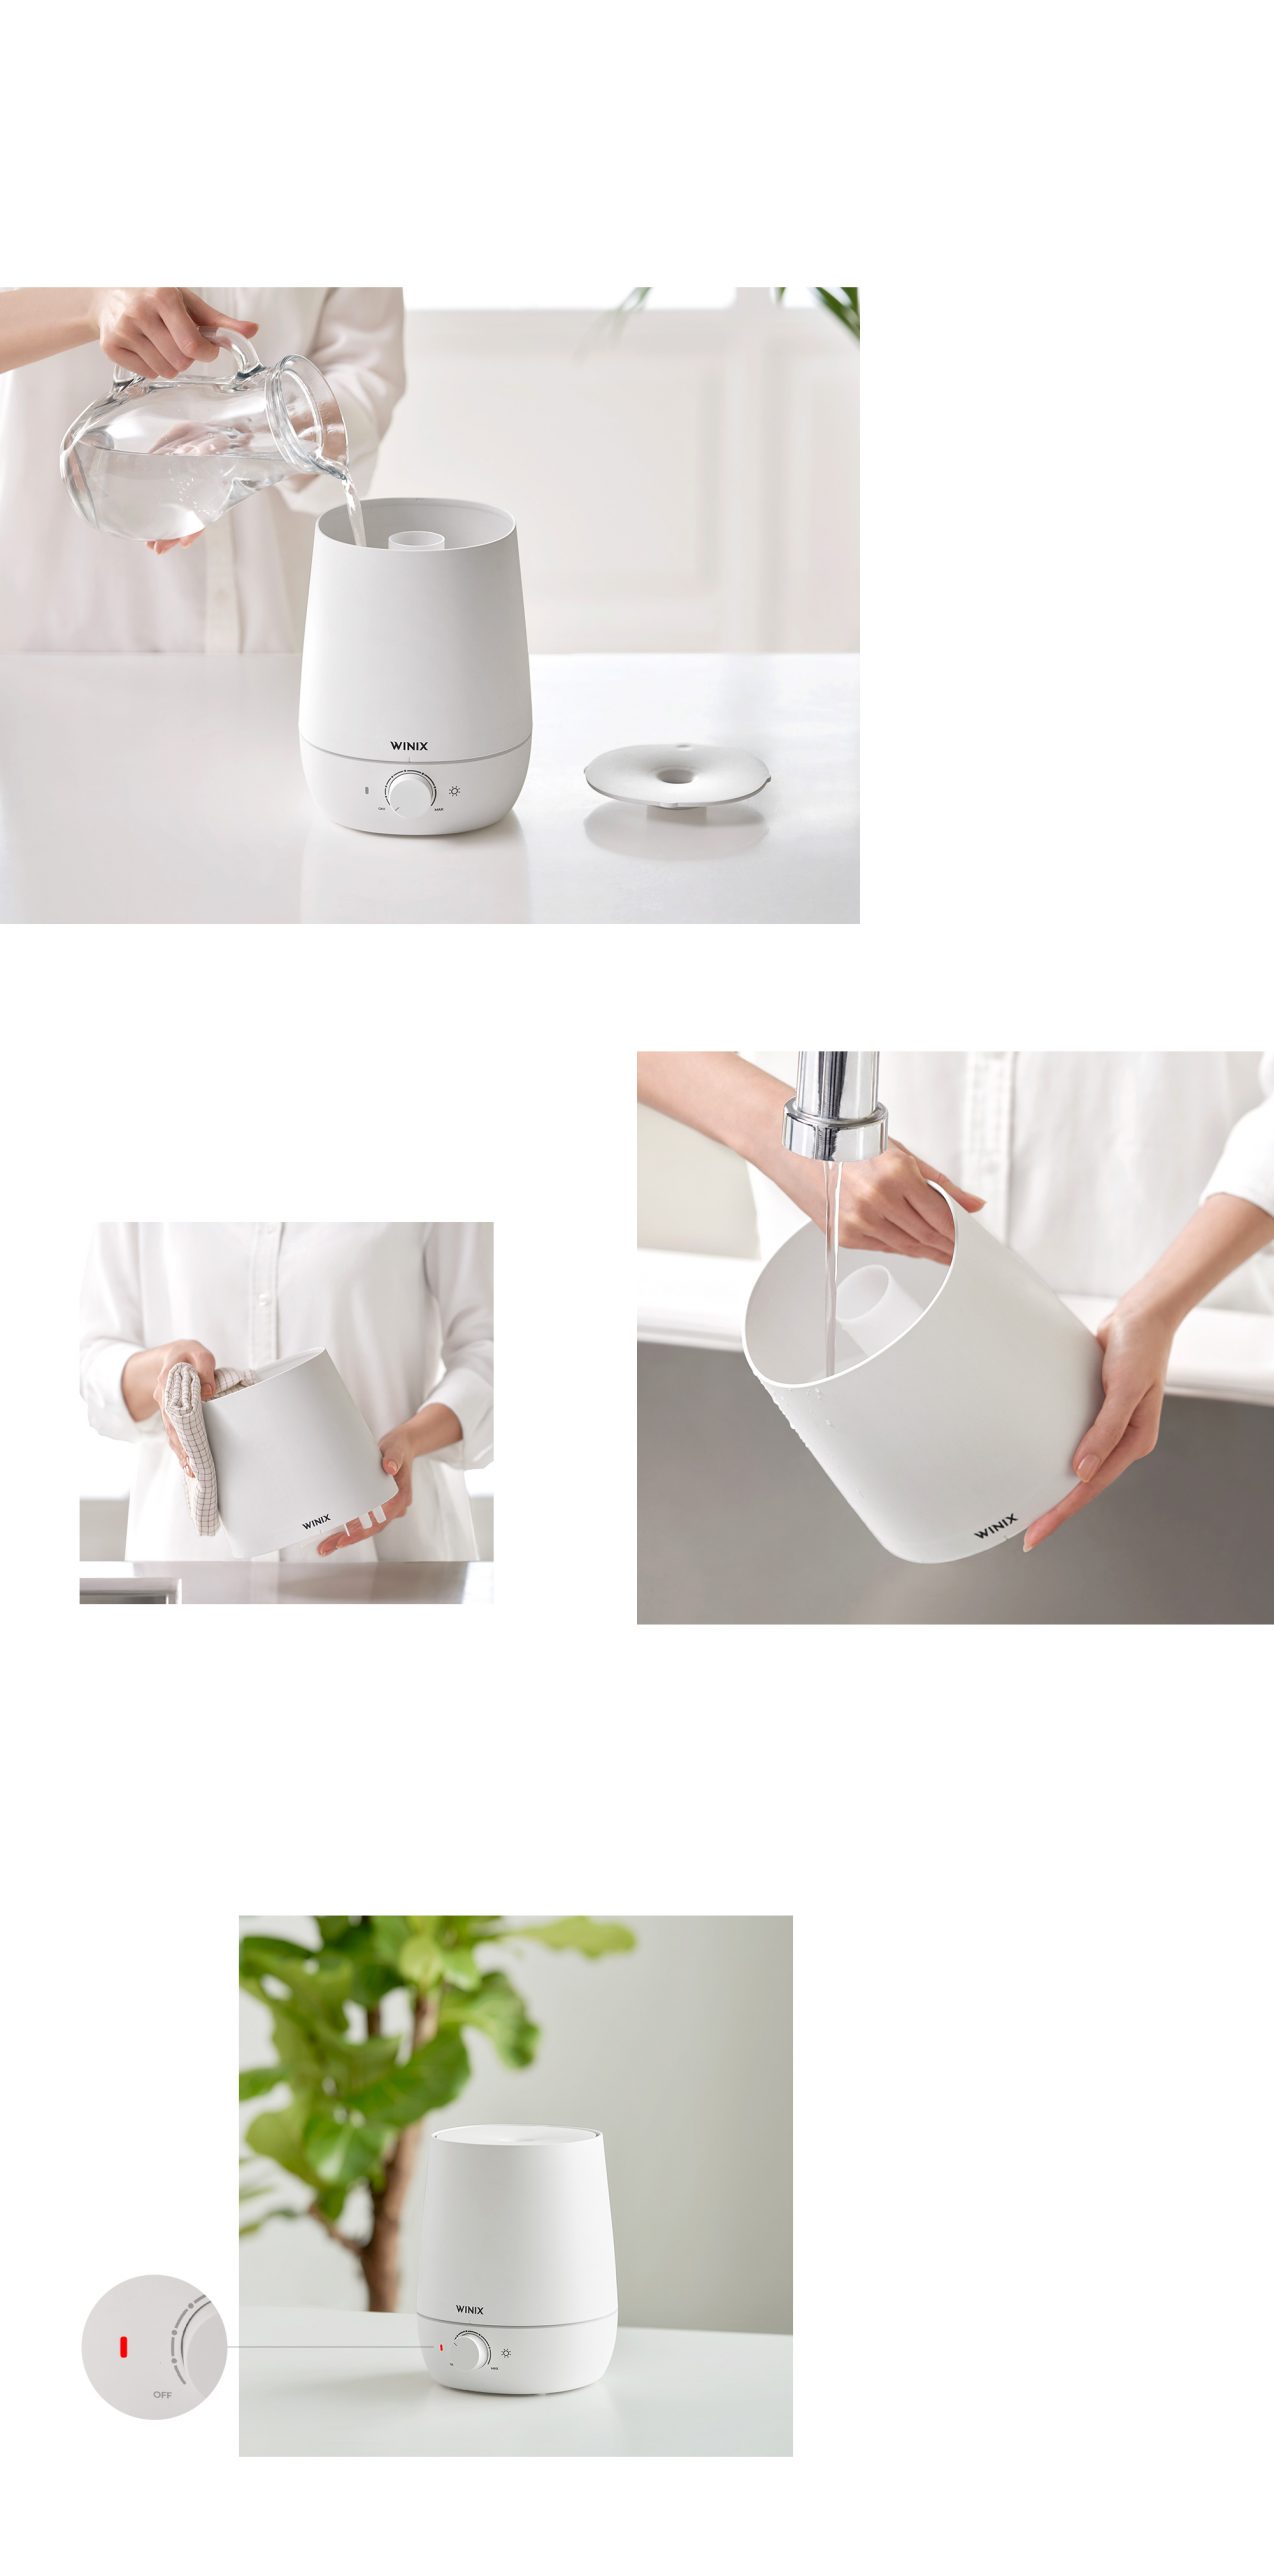 Four images of L60 Humidifier being filled with water, wiped down with a cloth, being cleaned under faucet, and on top of white table